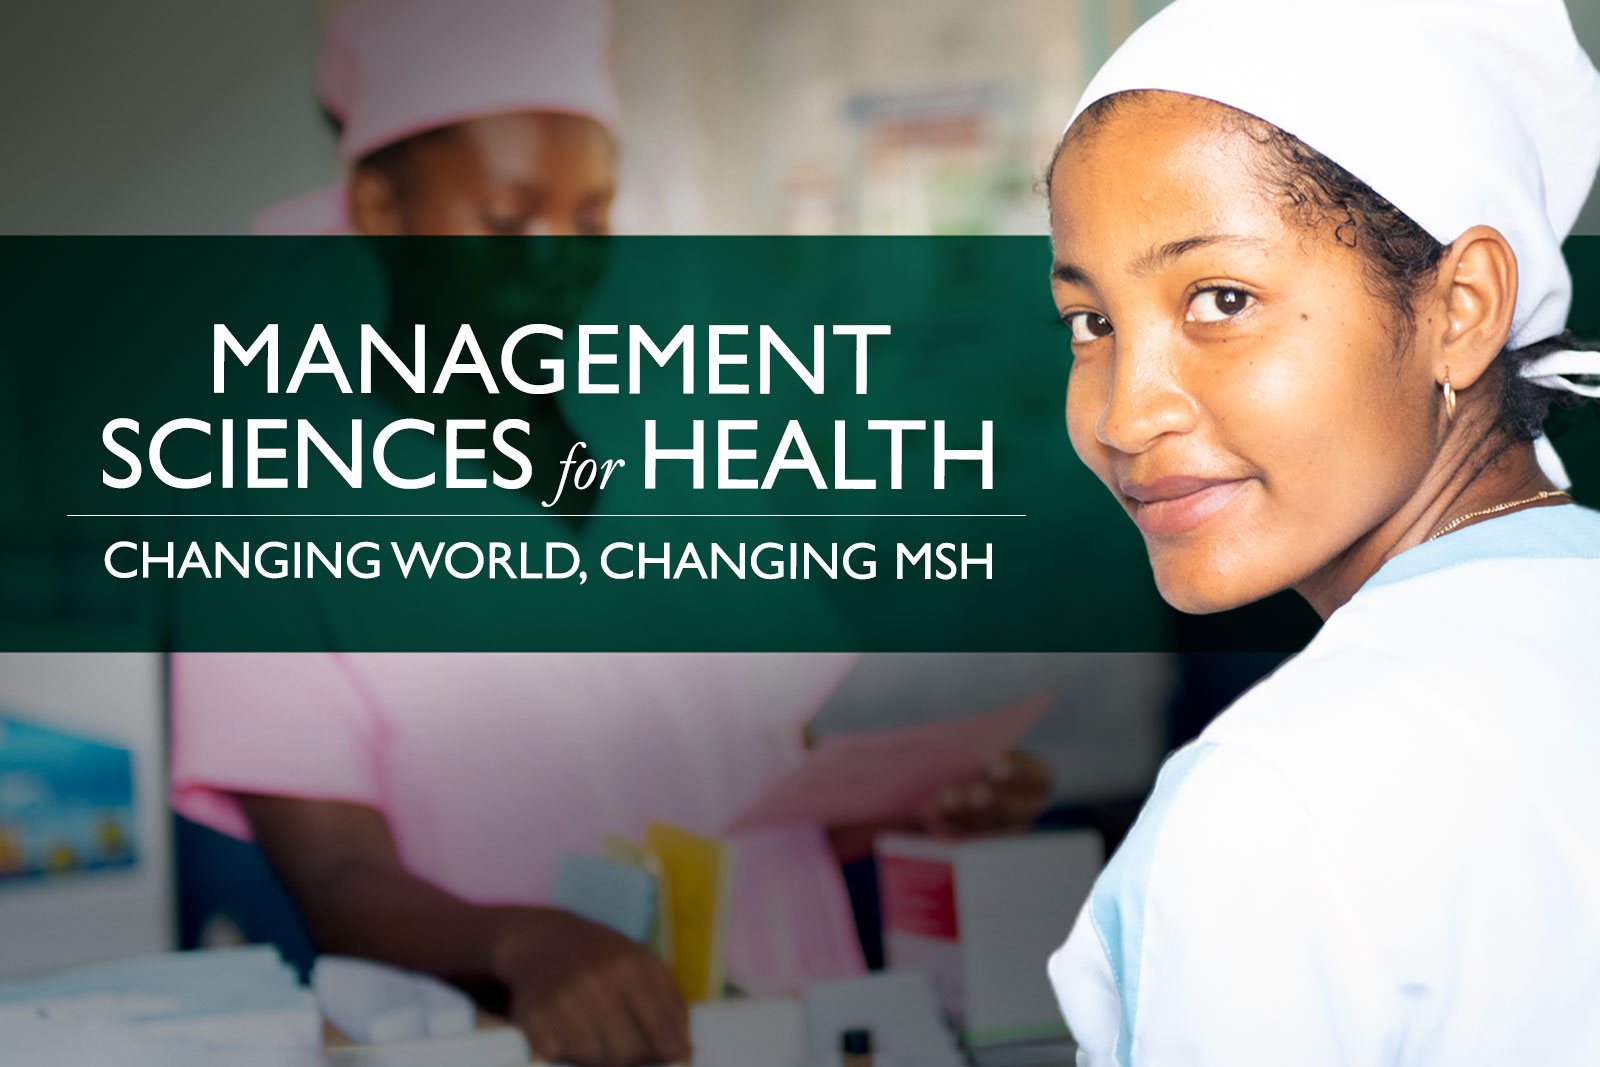 Management Sciences for Health: Changing World, Changing MSH